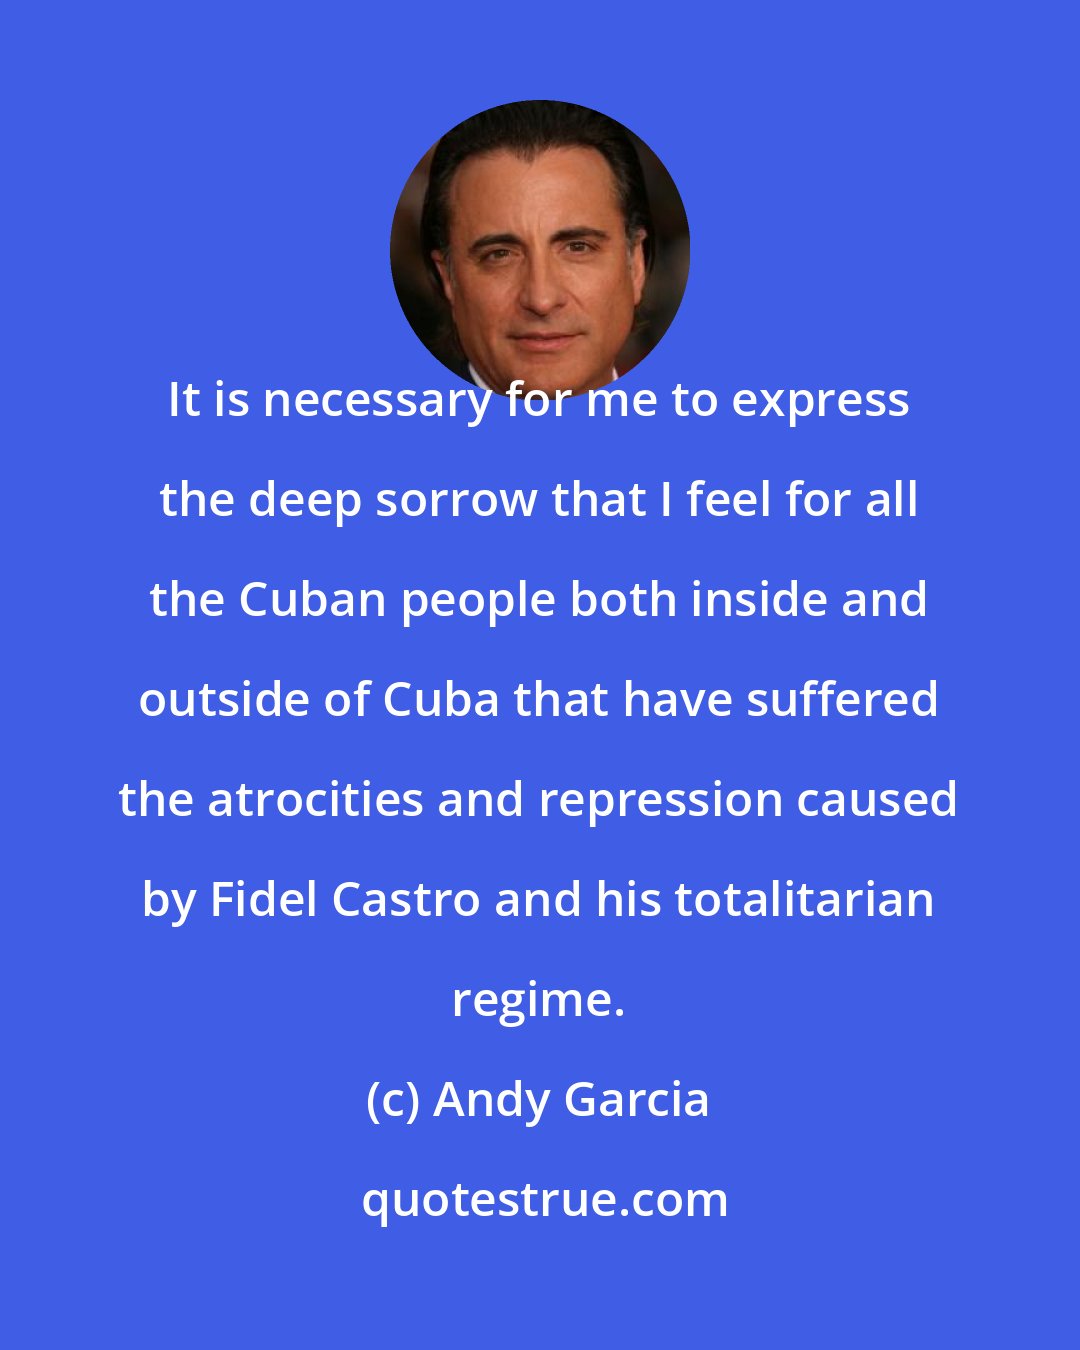 Andy Garcia: It is necessary for me to express the deep sorrow that I feel for all the Cuban people both inside and outside of Cuba that have suffered the atrocities and repression caused by Fidel Castro and his totalitarian regime.